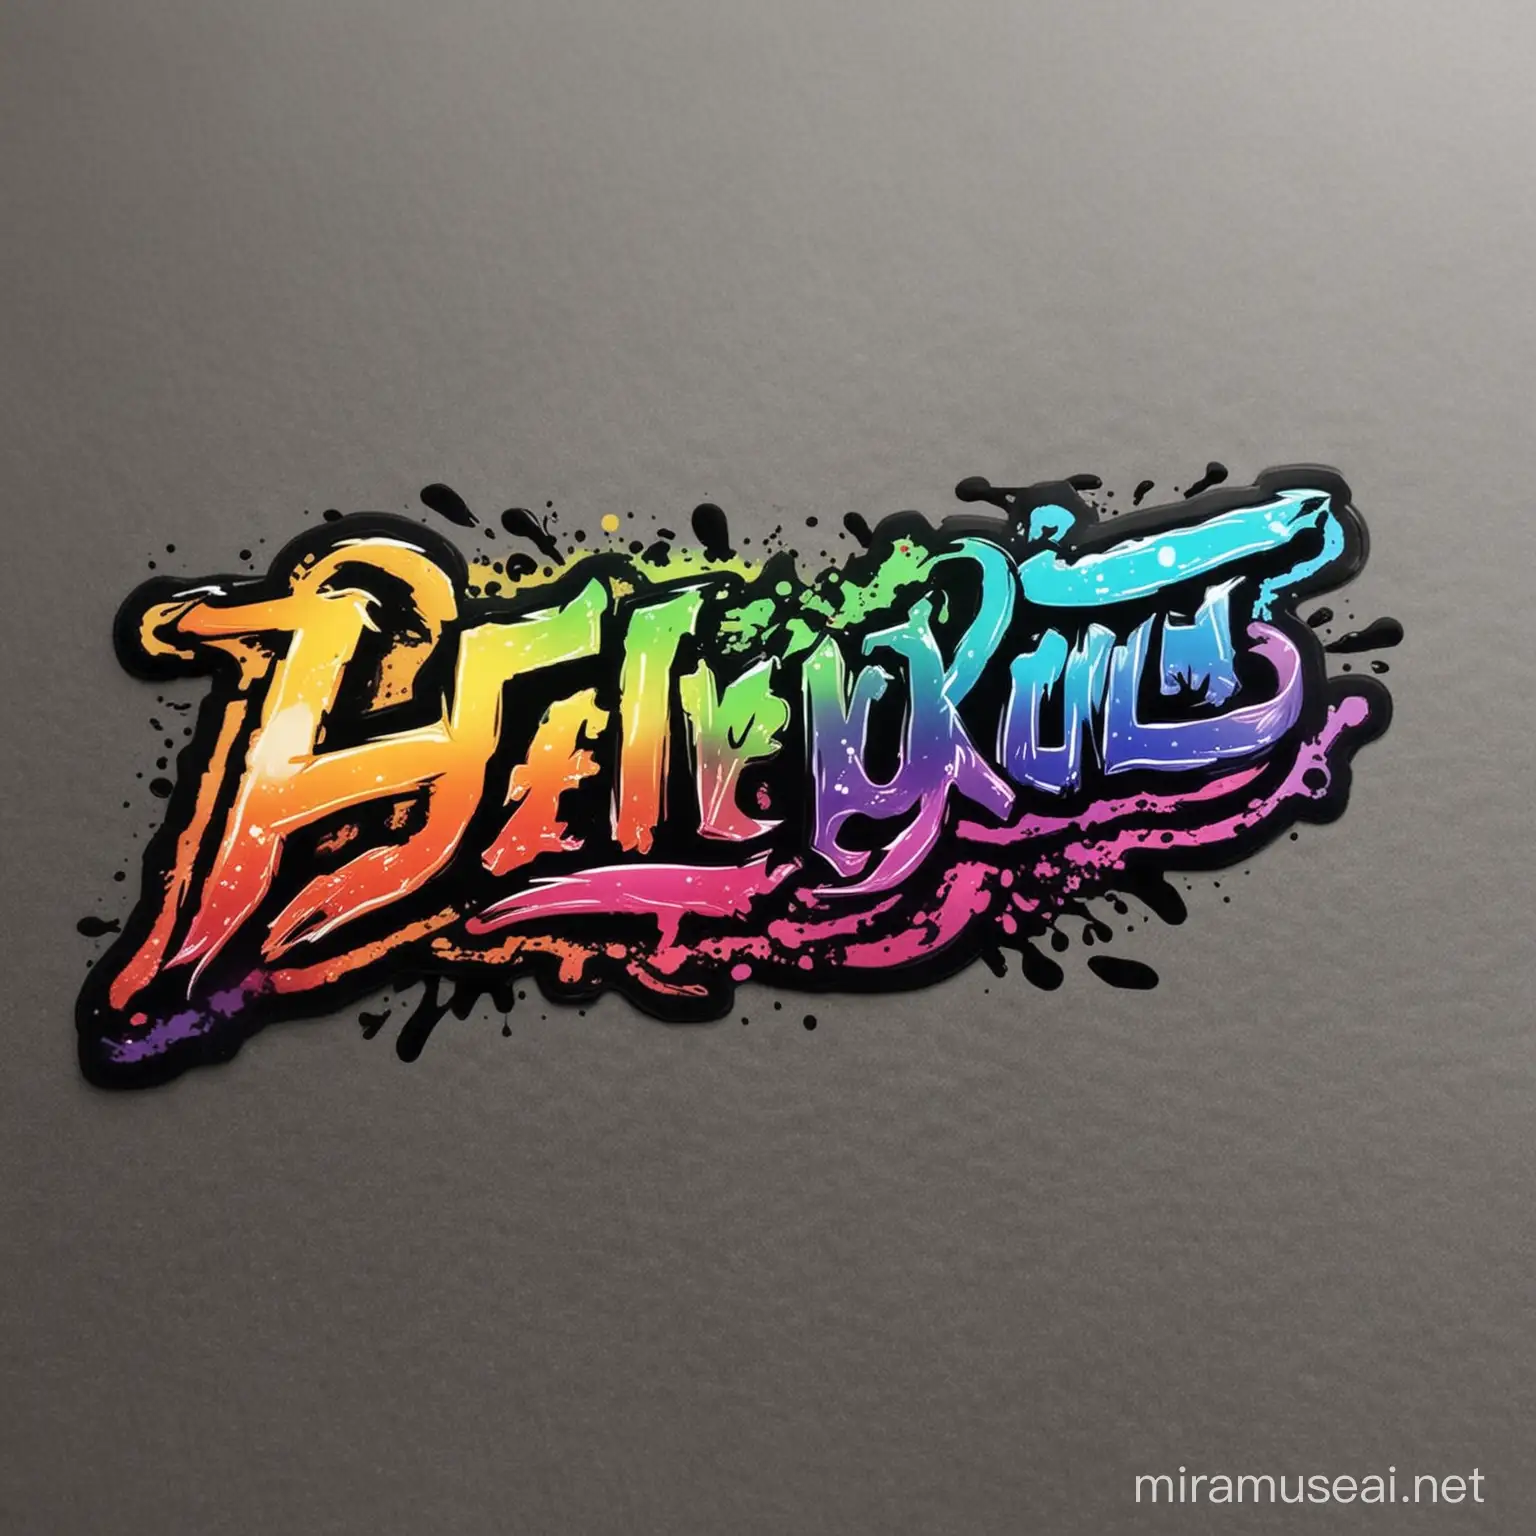 create a UV DTF DECAL that is very colorful without any words
